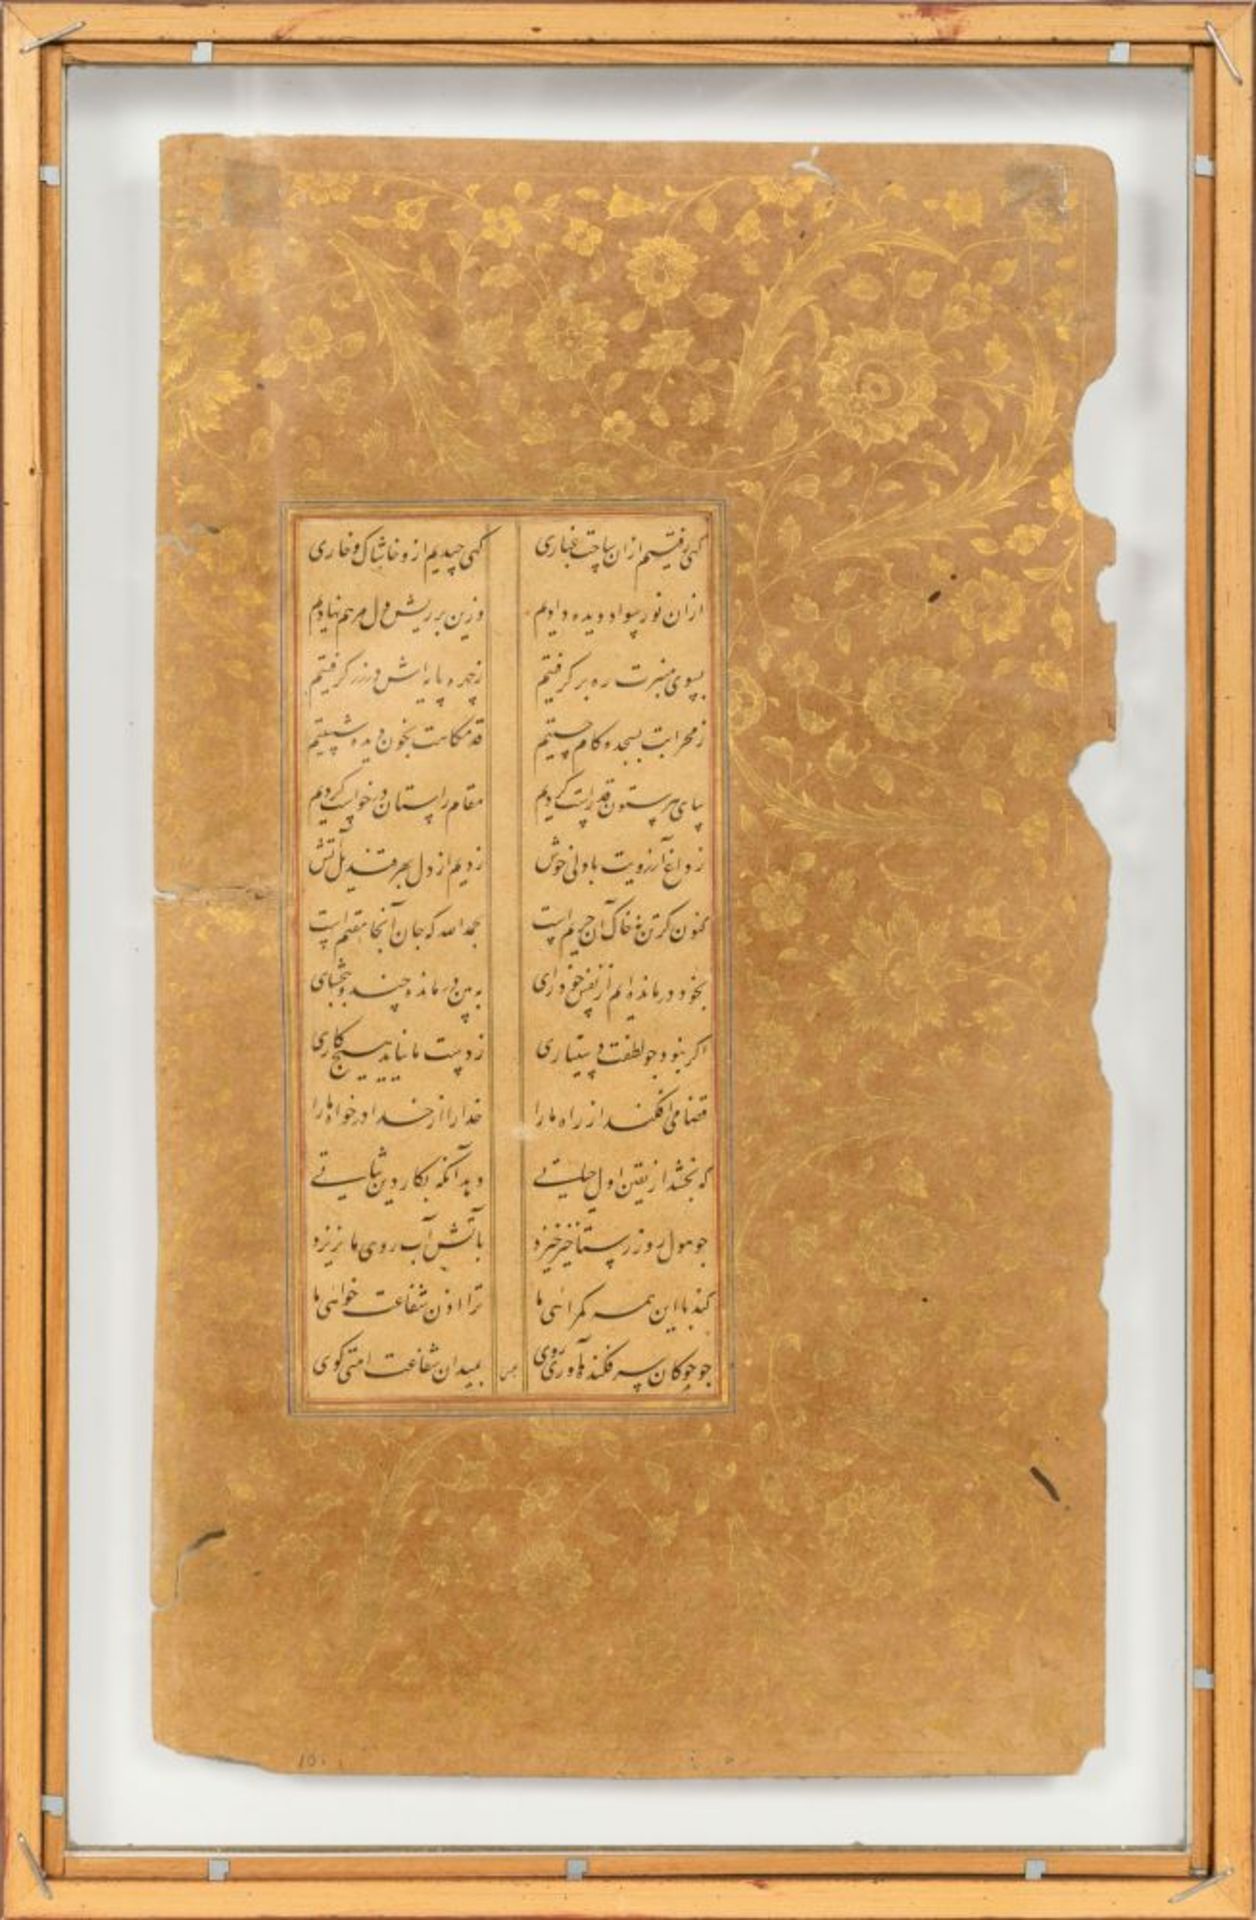 Border Drawings and Page from a Manuscript of 'Yusuf and Zulaykha' by Jami. - Image 2 of 2